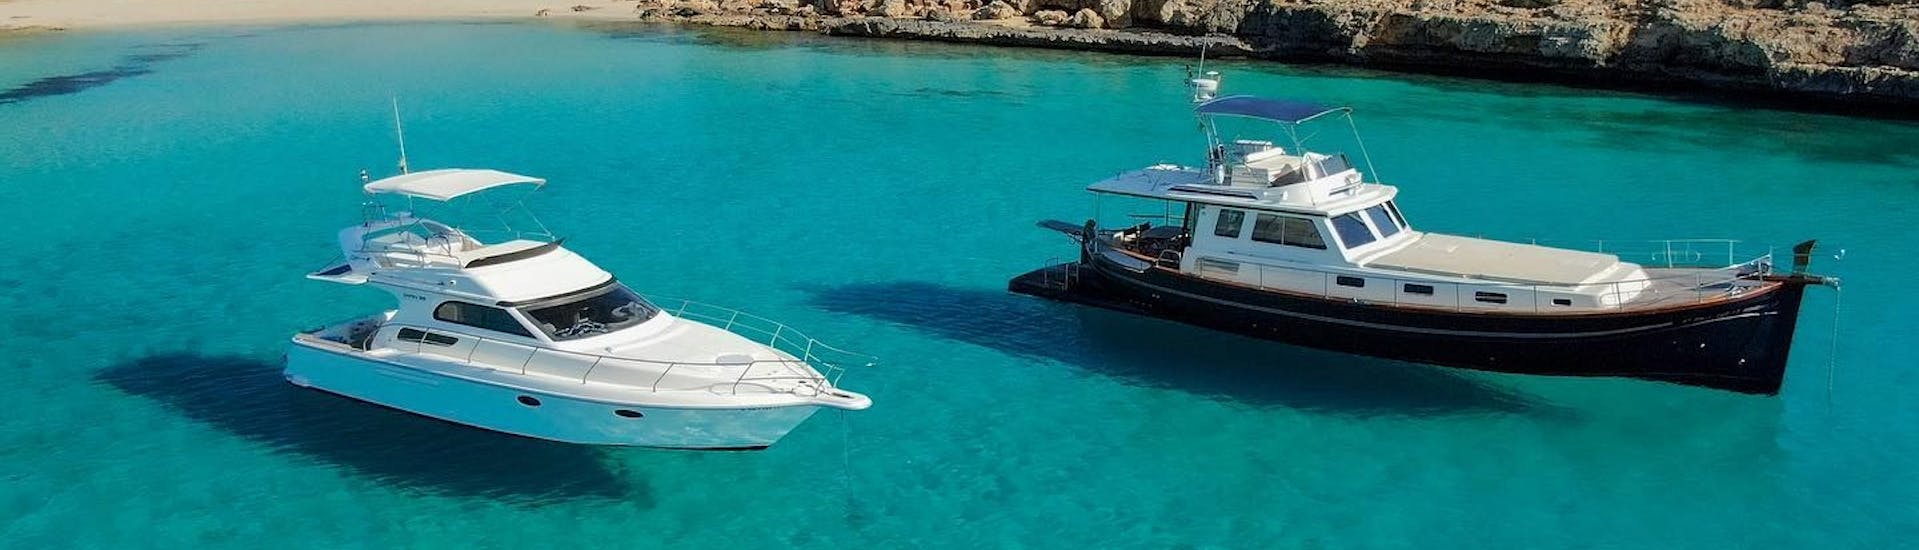 Private Yachttour nach Cala Varques & Virgili - All Inkl..